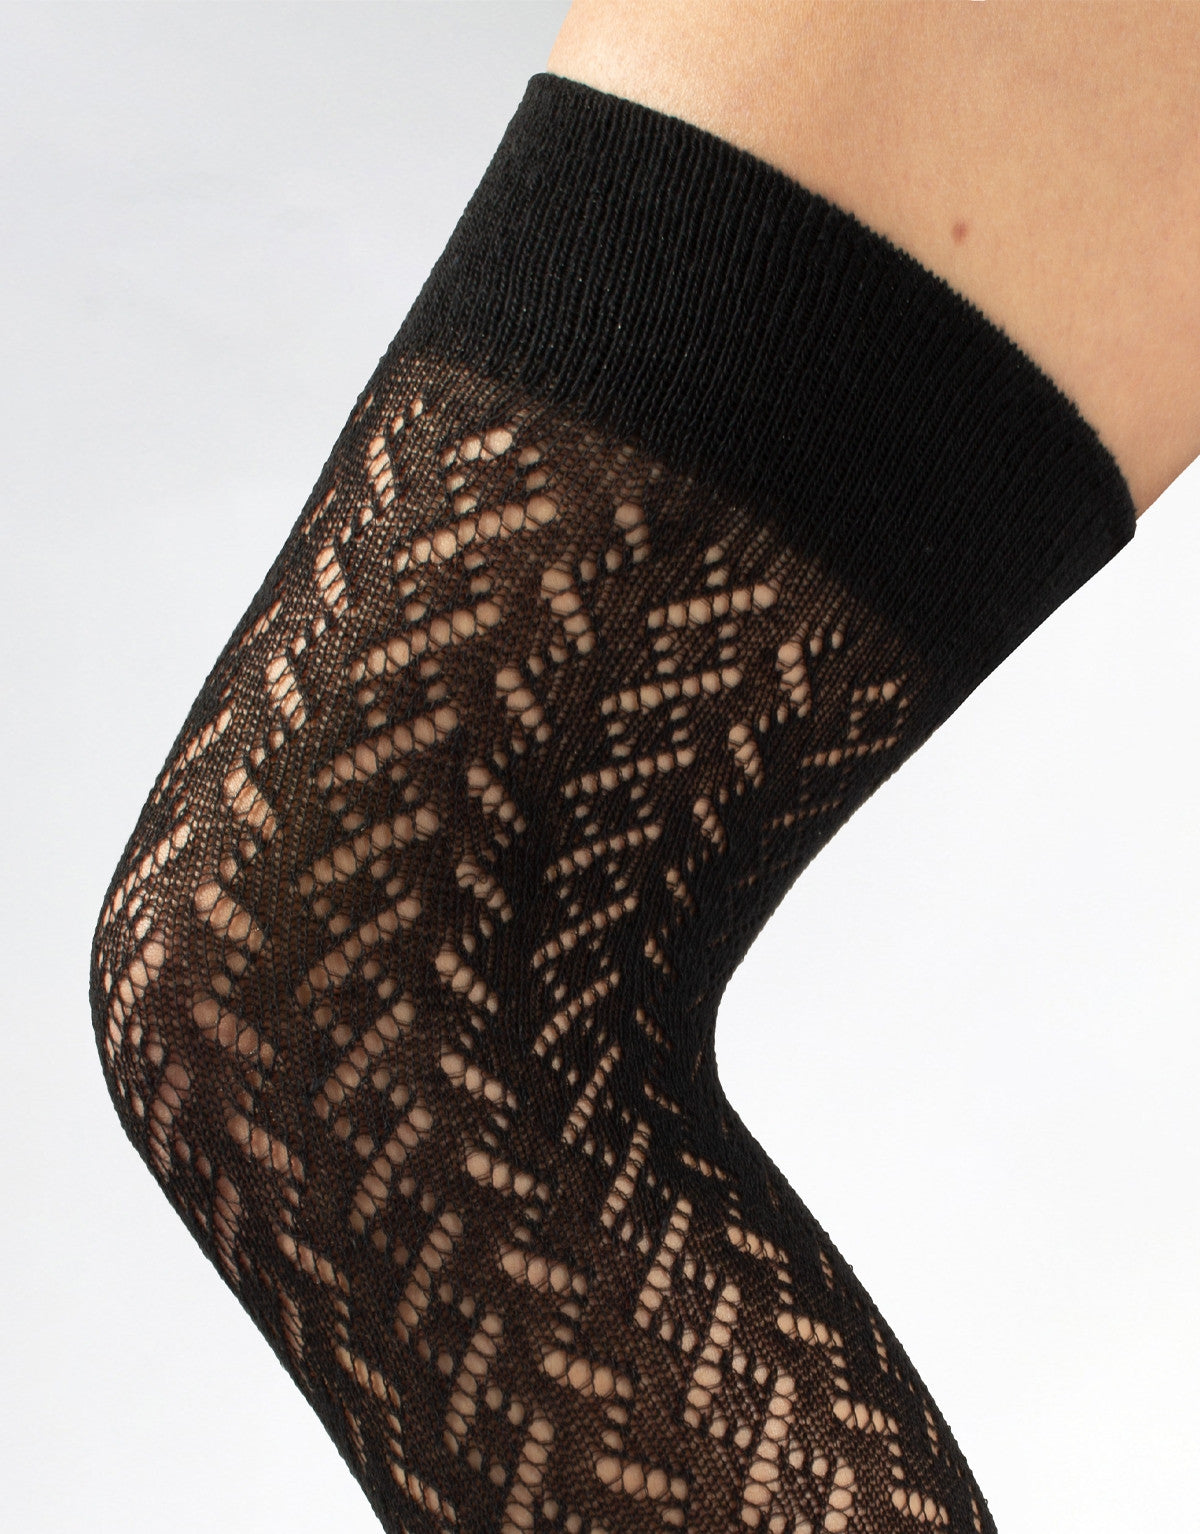 Calzitaly Chevron Over-Knee Socks - Black knitted over the knee socks with an openwork cable style pattern, plain elasticated cuff and plain toe.